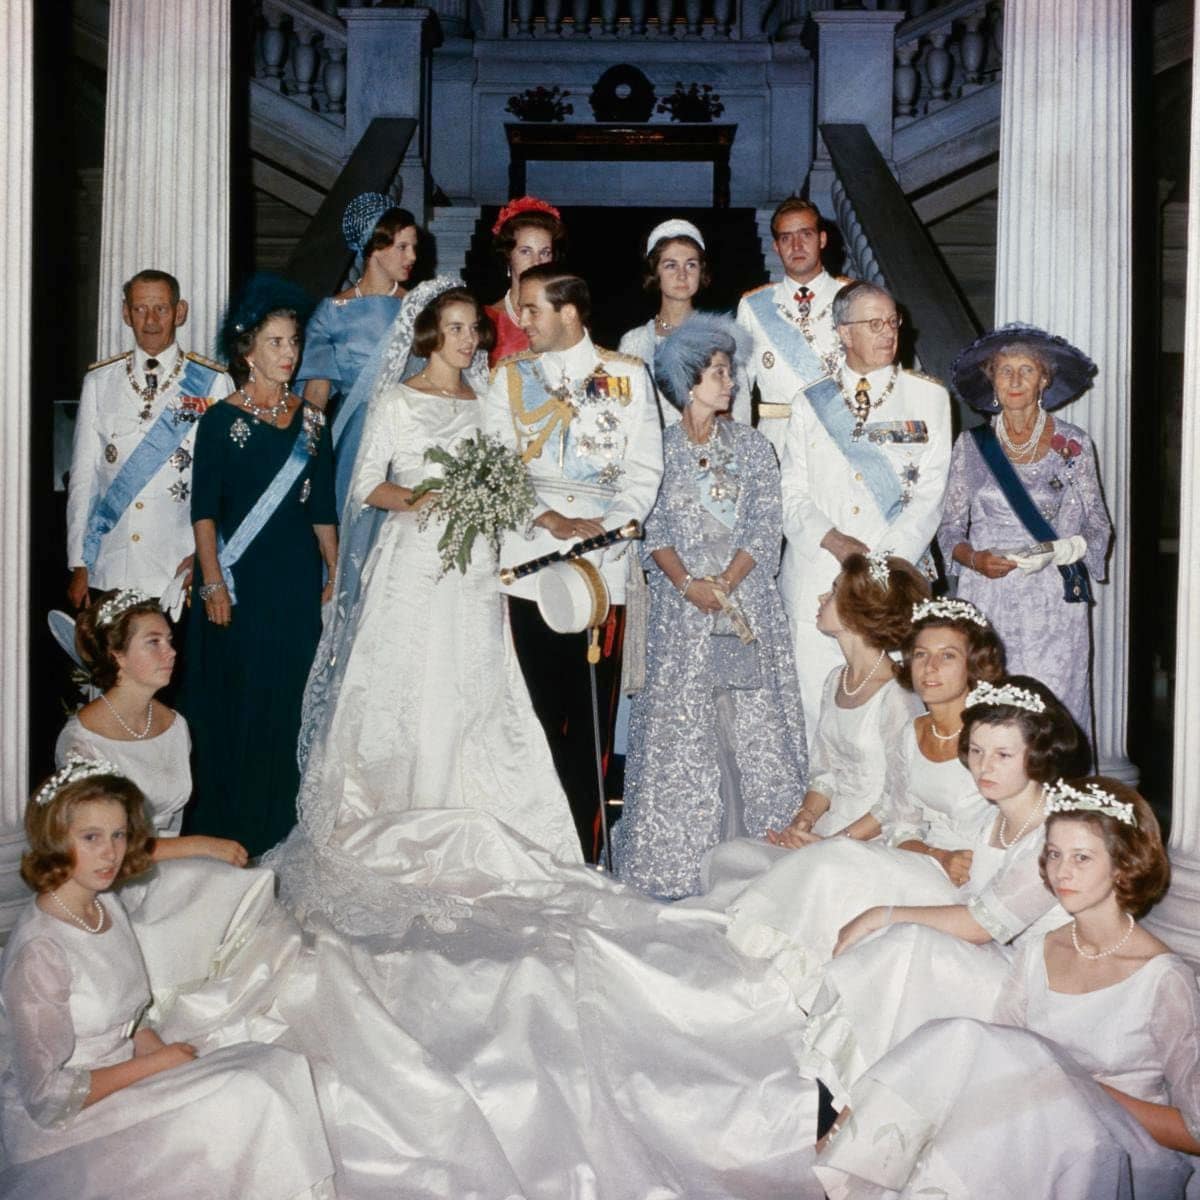 In 1964, the Greek royal married Princess Anne-Marie, the youngest daughter of King Frederick IX of Denmark and Queen Ingrid.